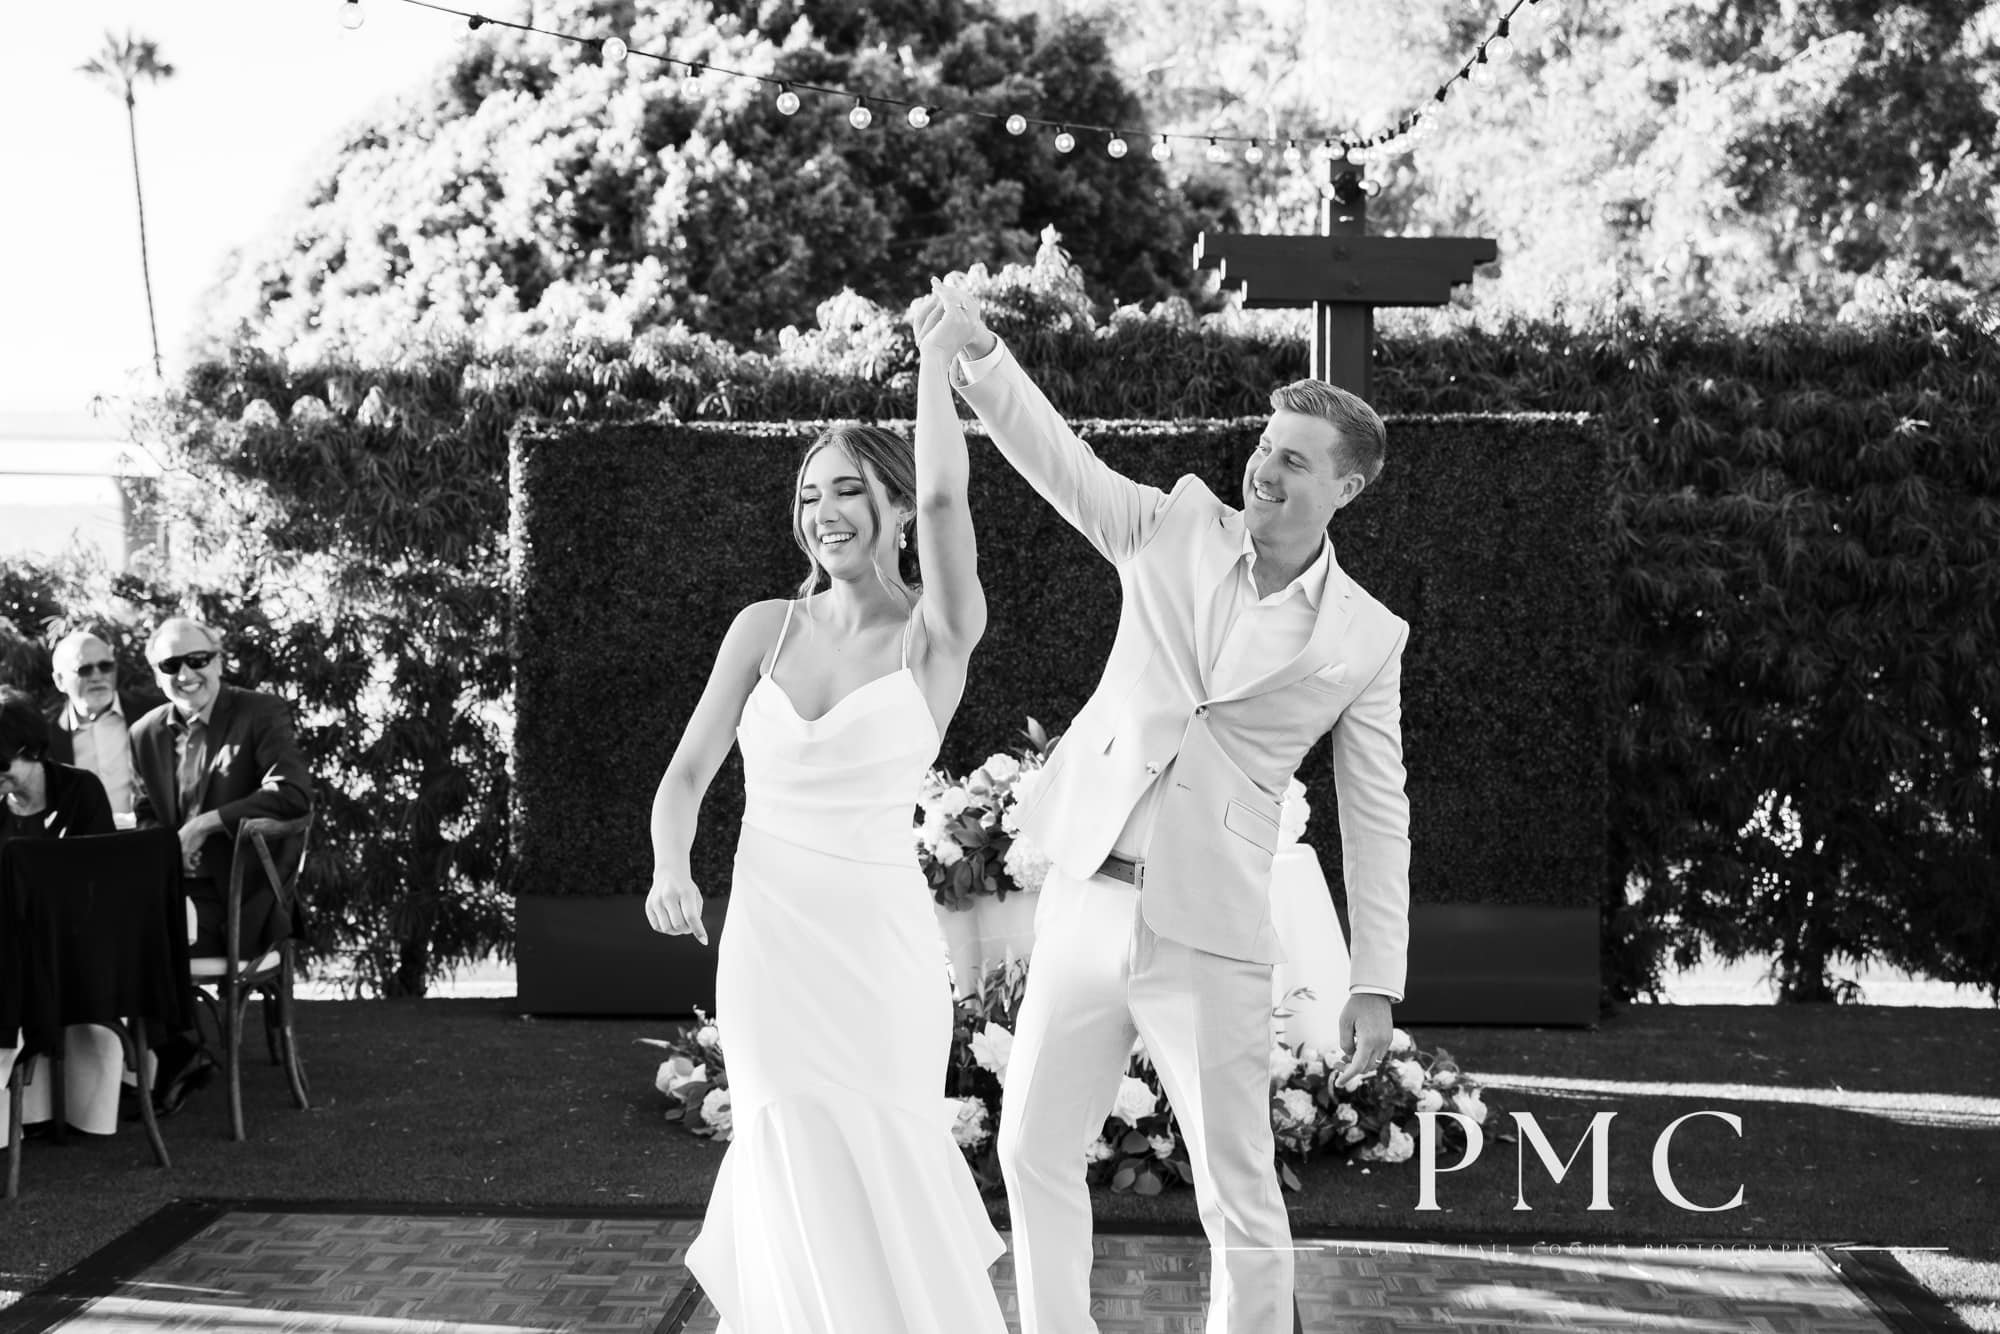 A bride and groom have their first dance at their outdoor summer wedding reception.